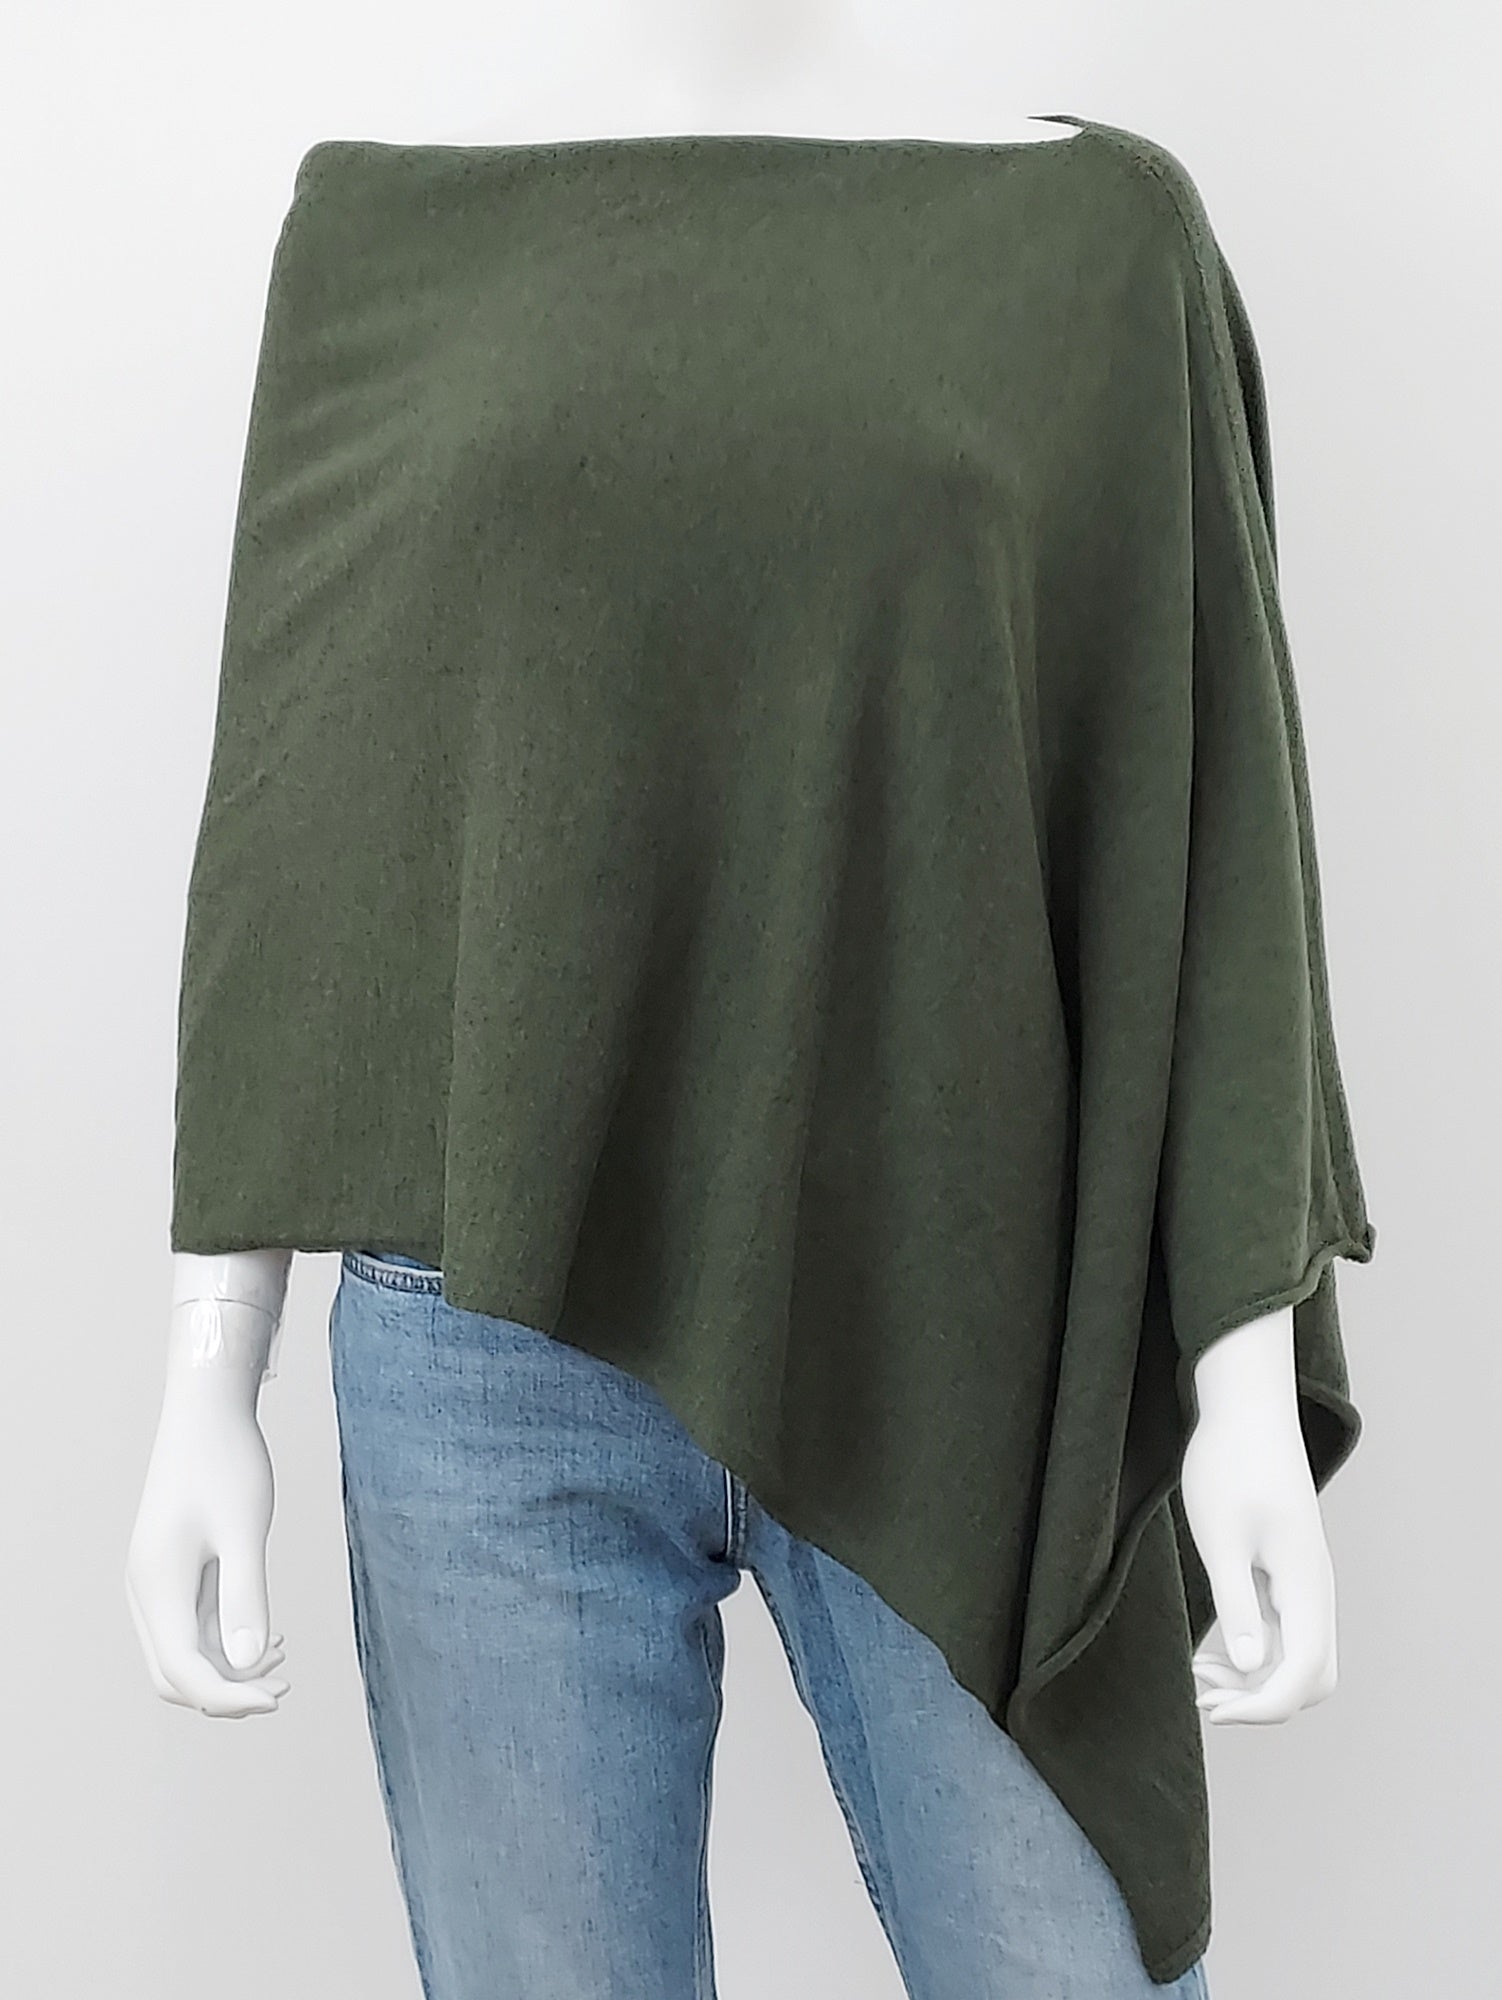 Off the Shoulder Sweater Size Small/Medium